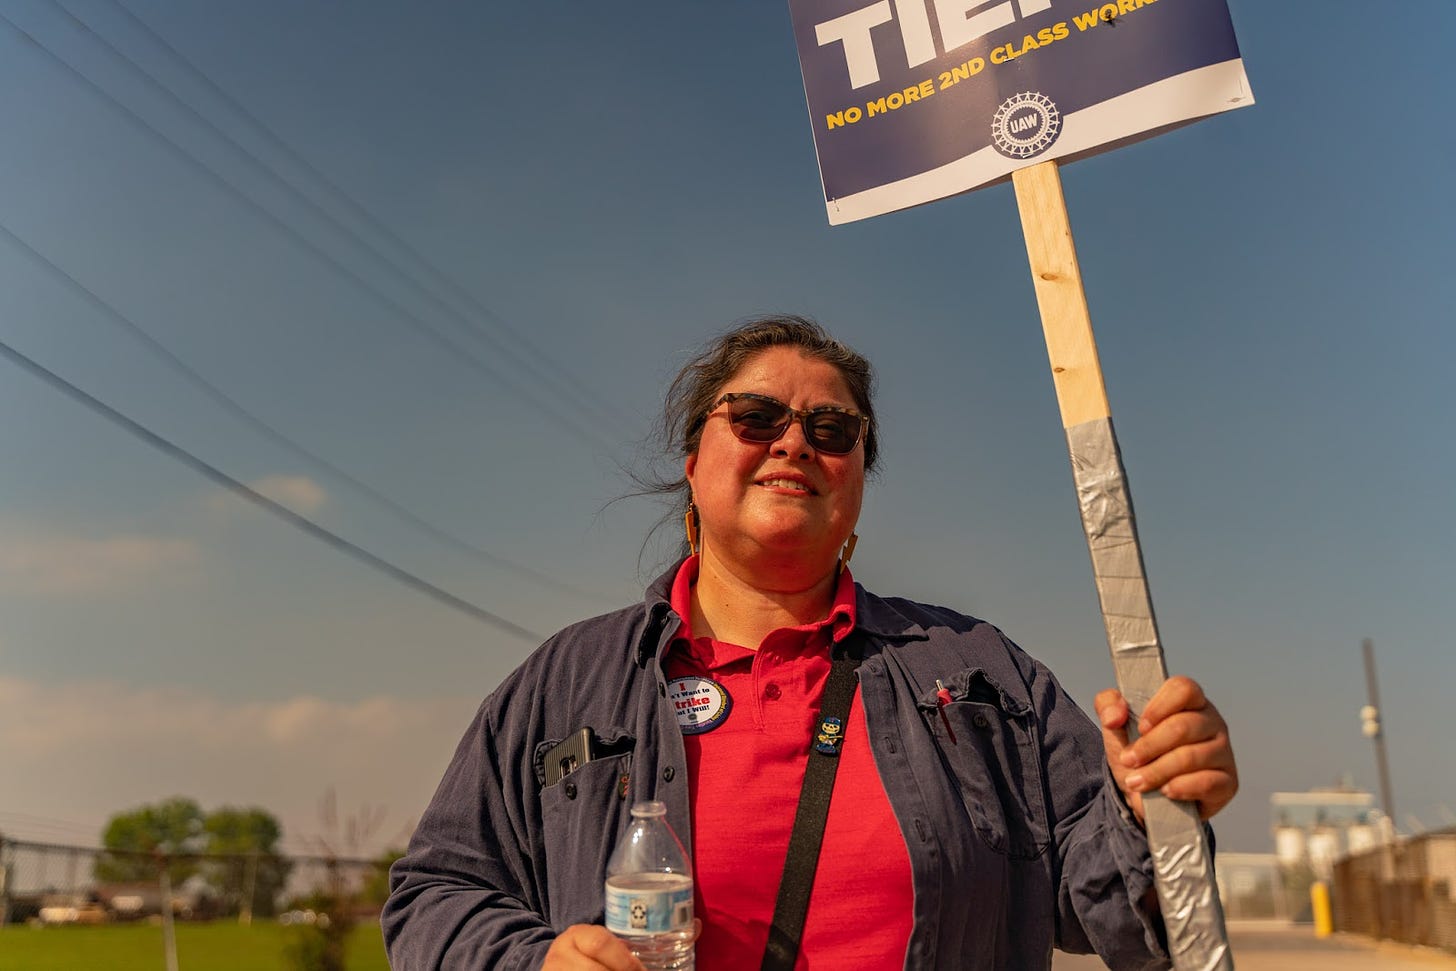 the upper half of a smiling woman with dark brown hair wearing sunglasses, a red polo shirt and dark blue outer shirt, holding a picket sign and a plastic water bottle